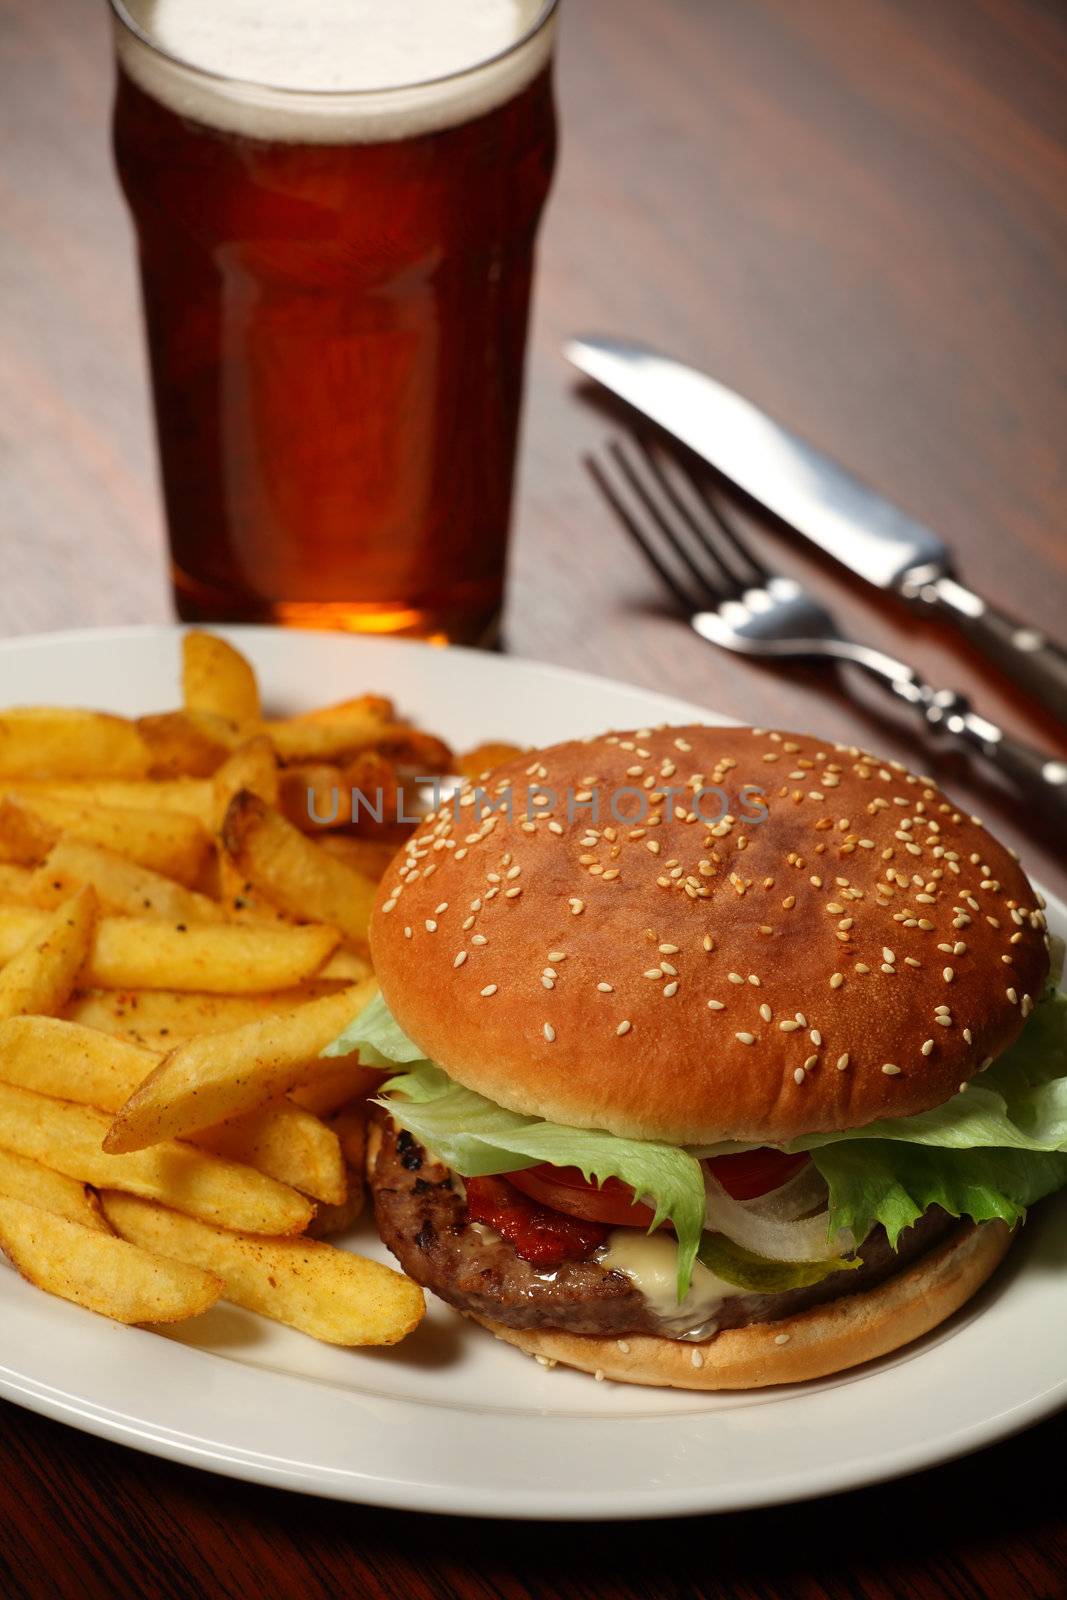 Burger and fries at a Pub by sumners